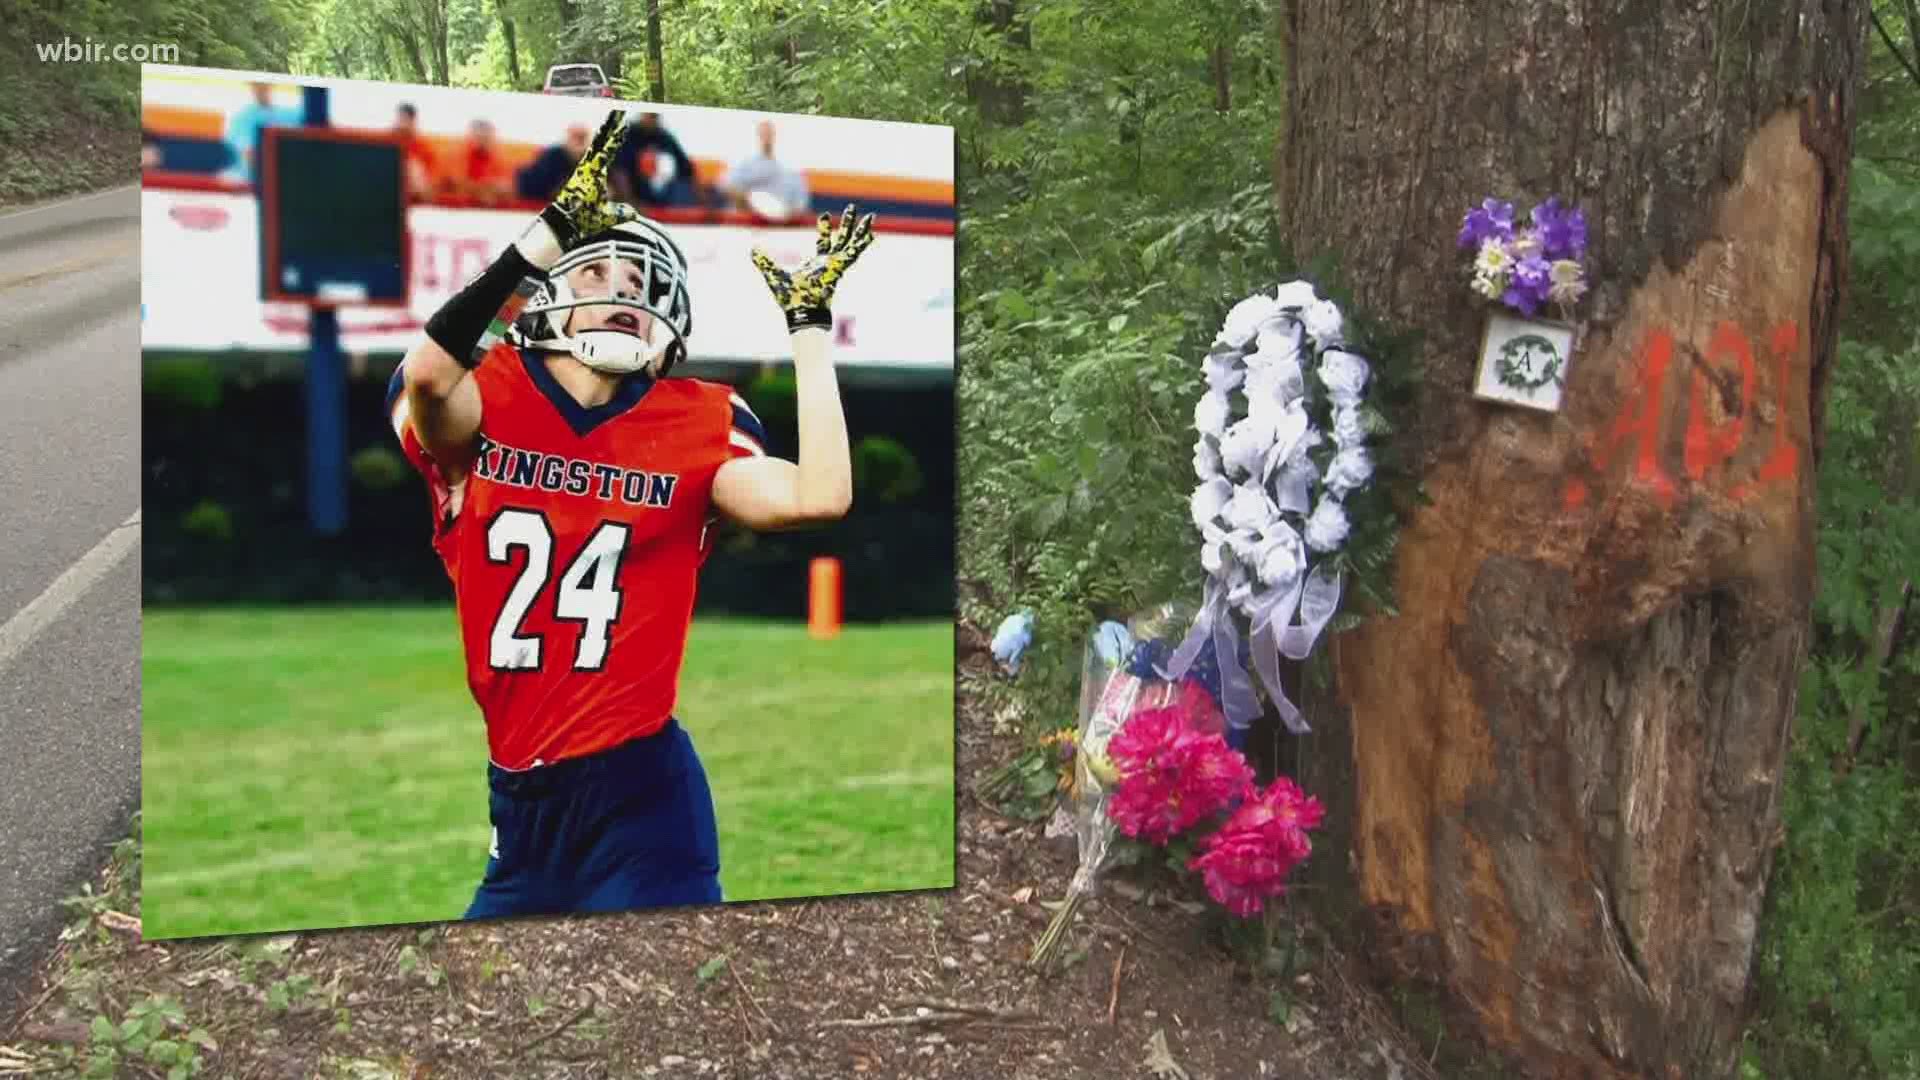 The Kingston community is remembering a Roane County teenager killed in a car crash last week, 16-year-old Austin Edmonds.